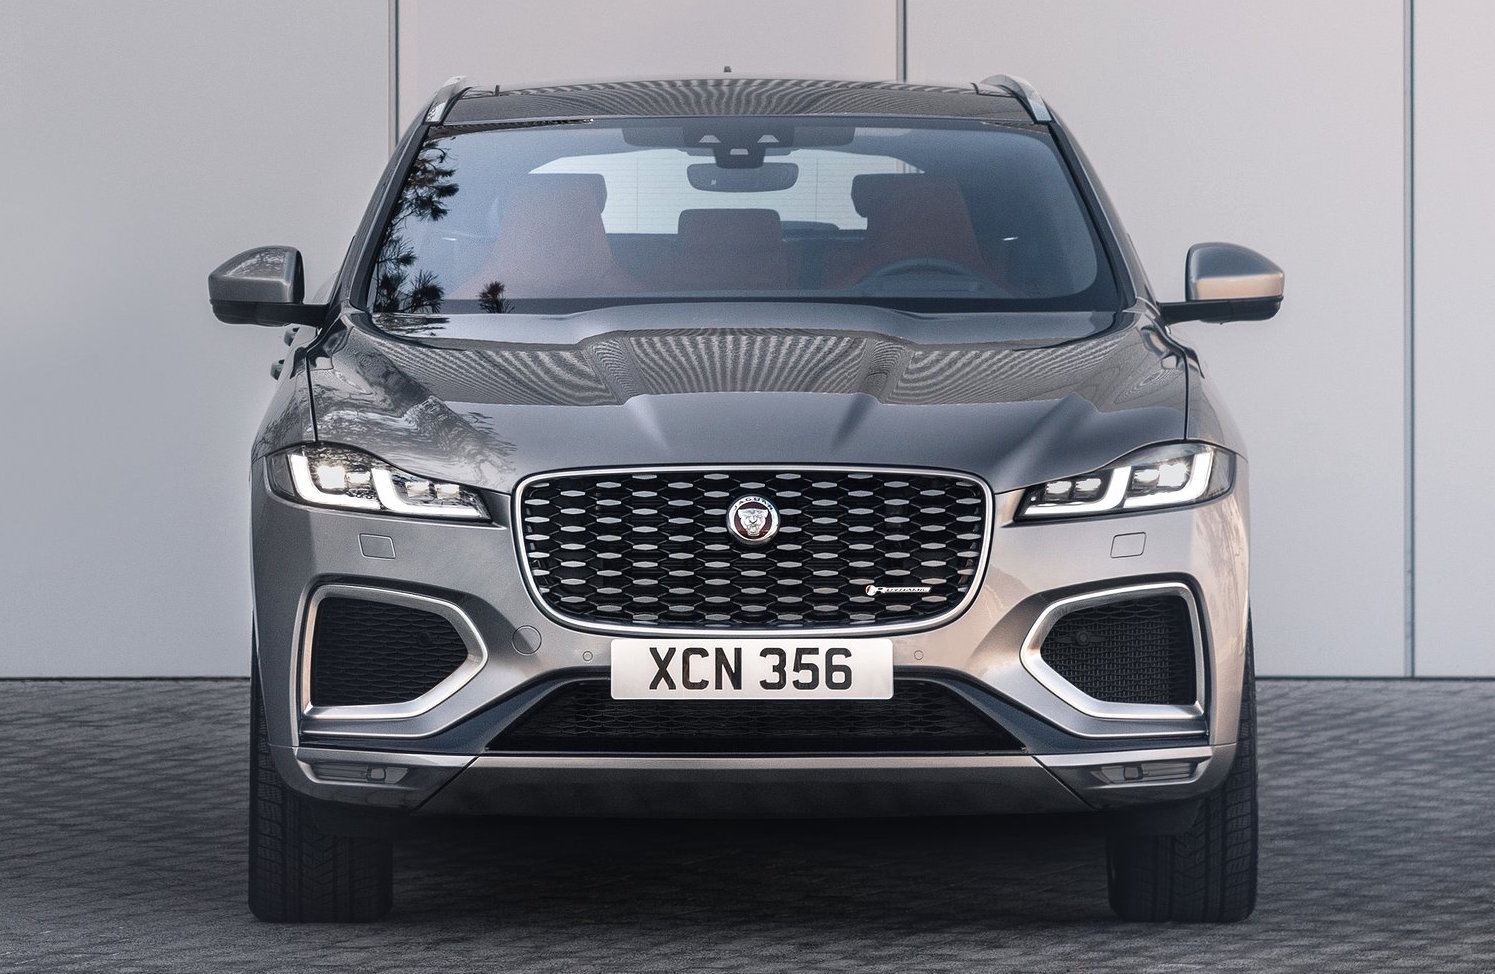 Jaguar J-PACE large SUV to be fully electric model line – report